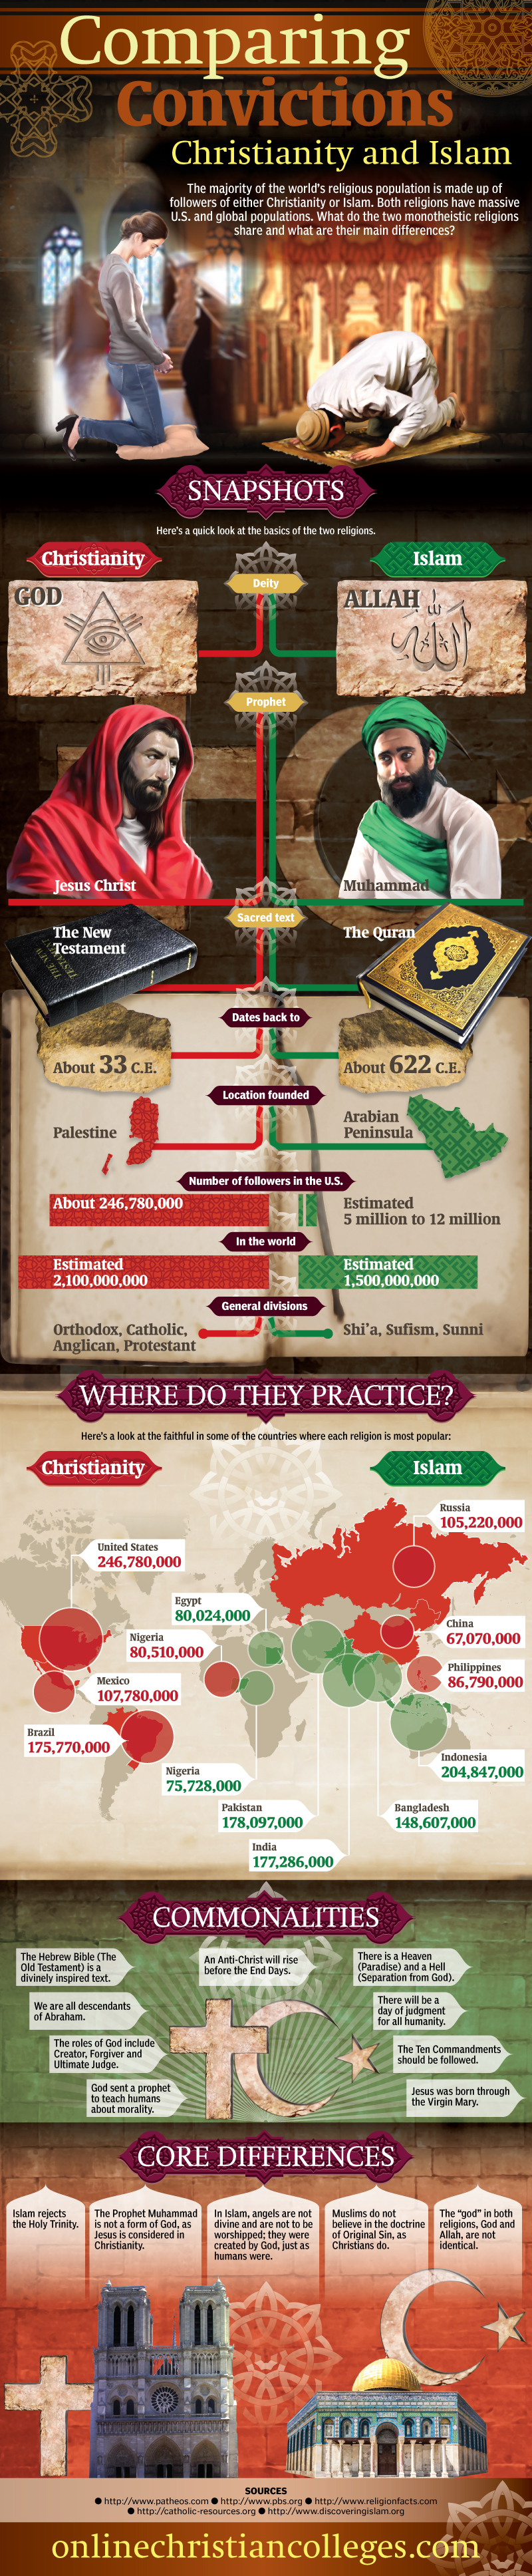 Comparing Convictions: Christianity and Islam